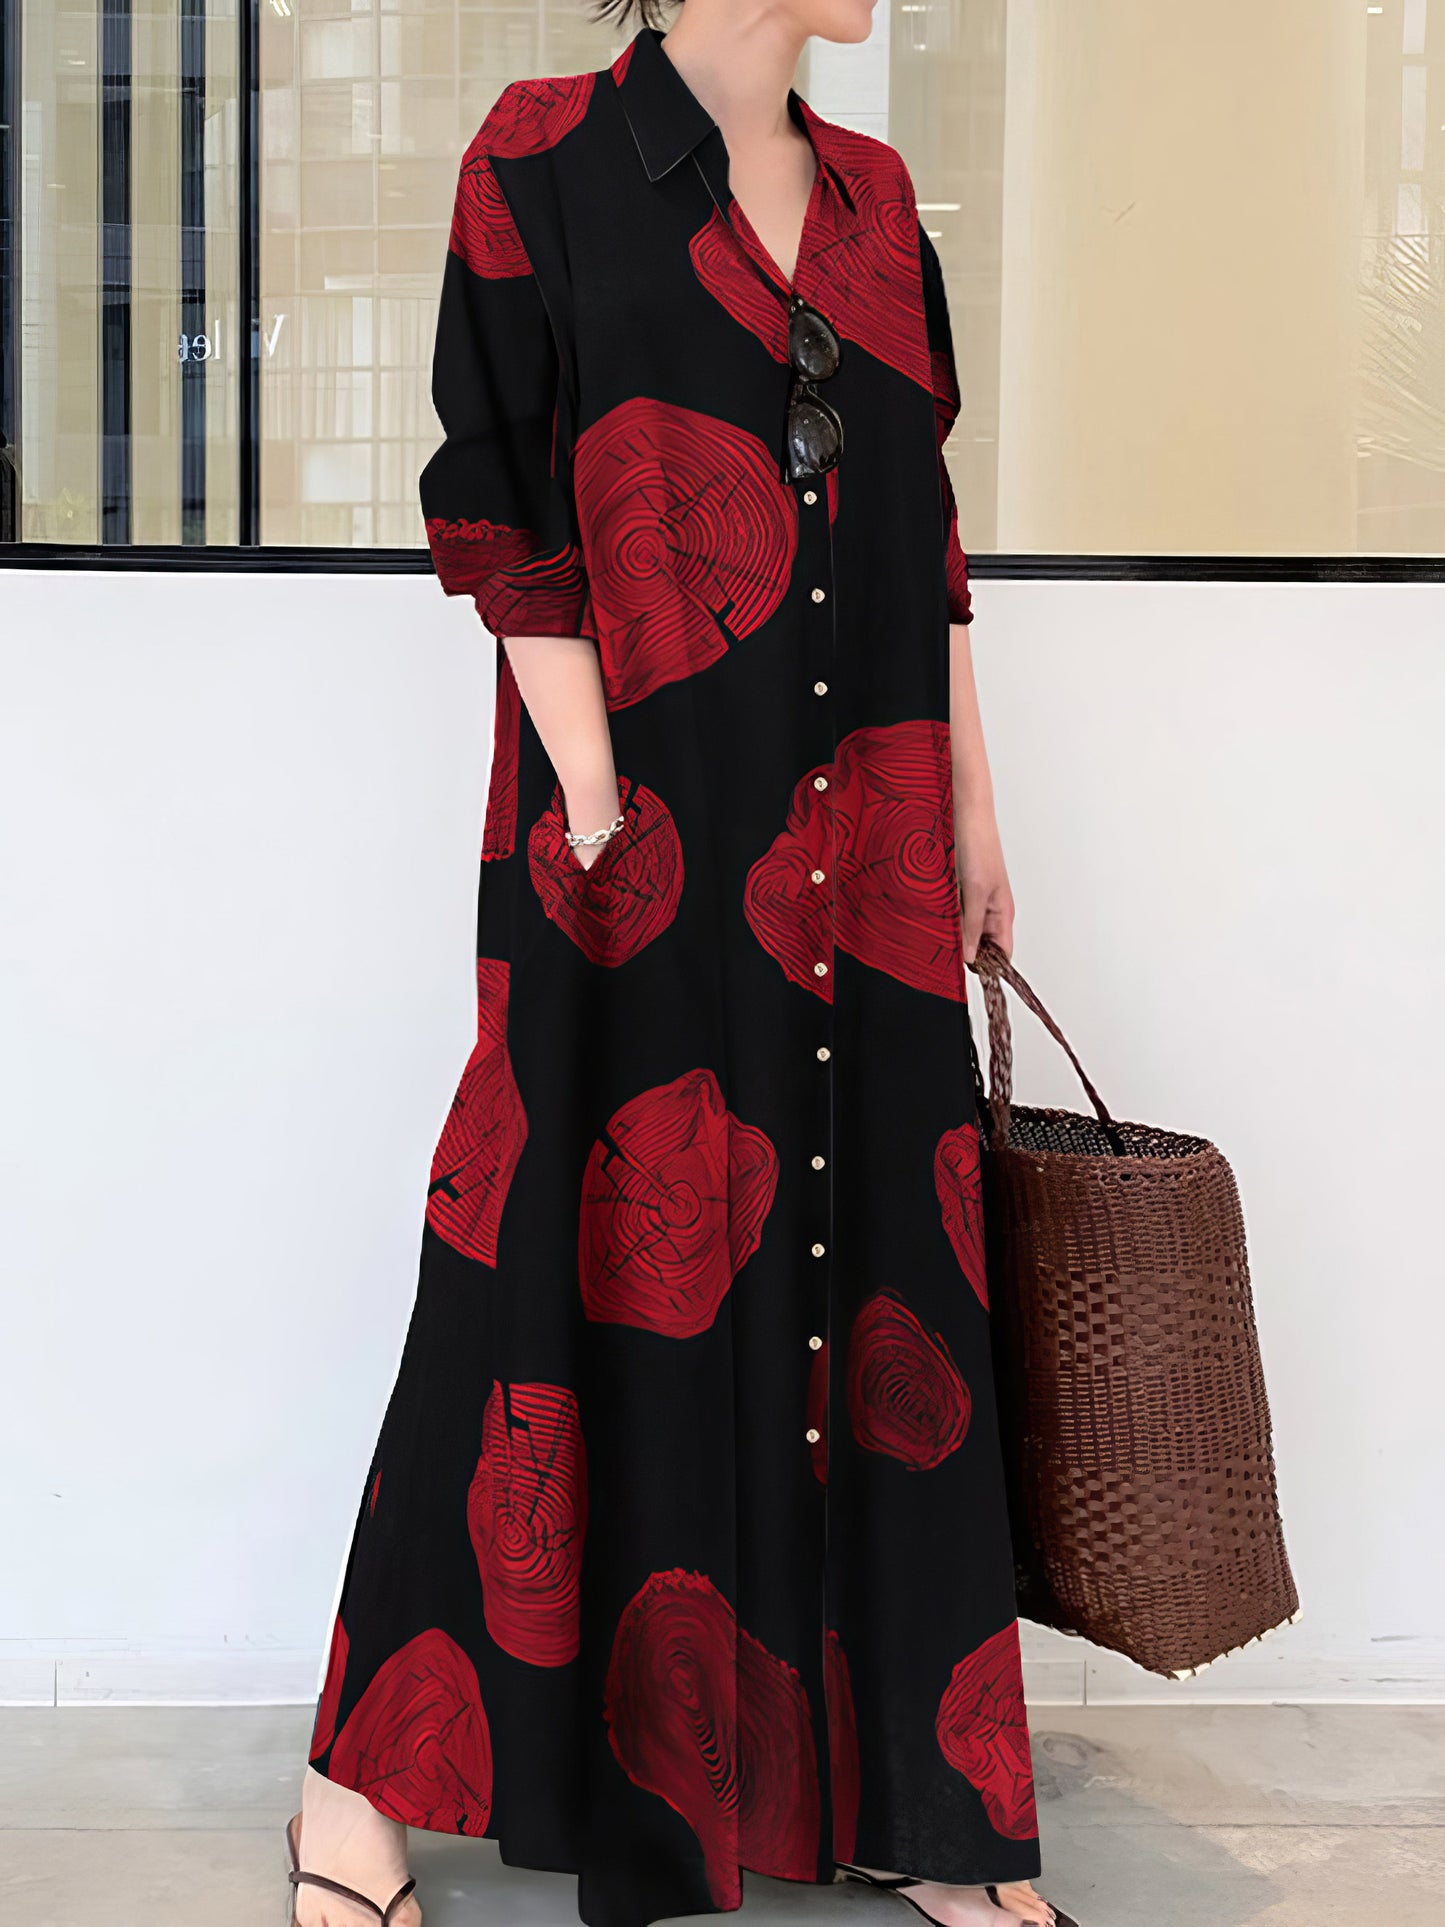 Maxi Dresses - Cotton Printed Long Sleeve Loose Casual Maxi Dress - MsDressly